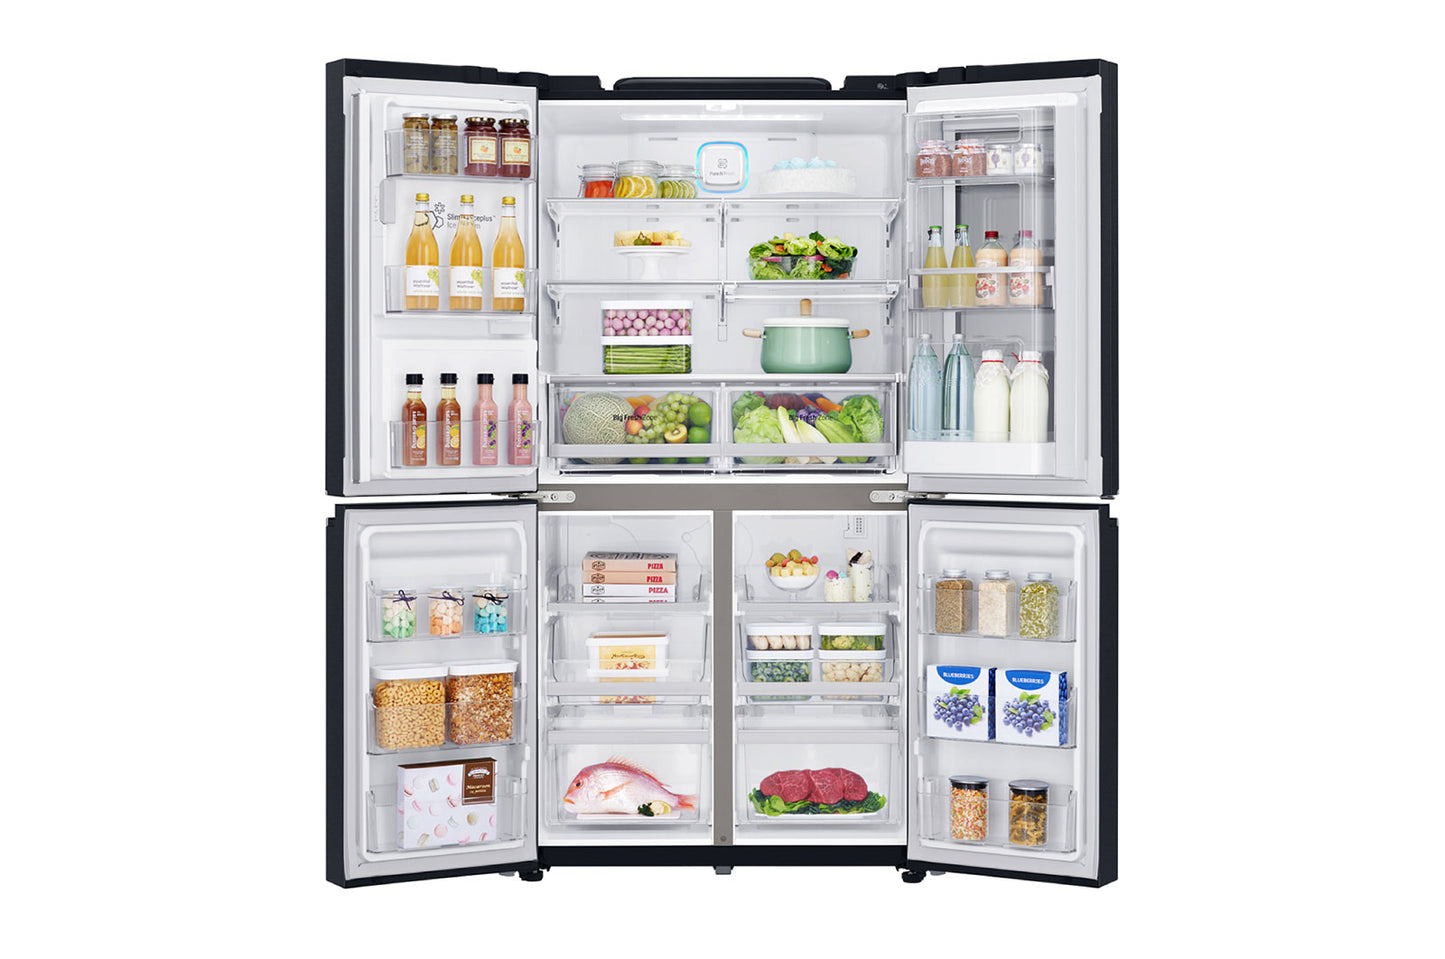 LG 716L Refrigerator with Water Dispenser